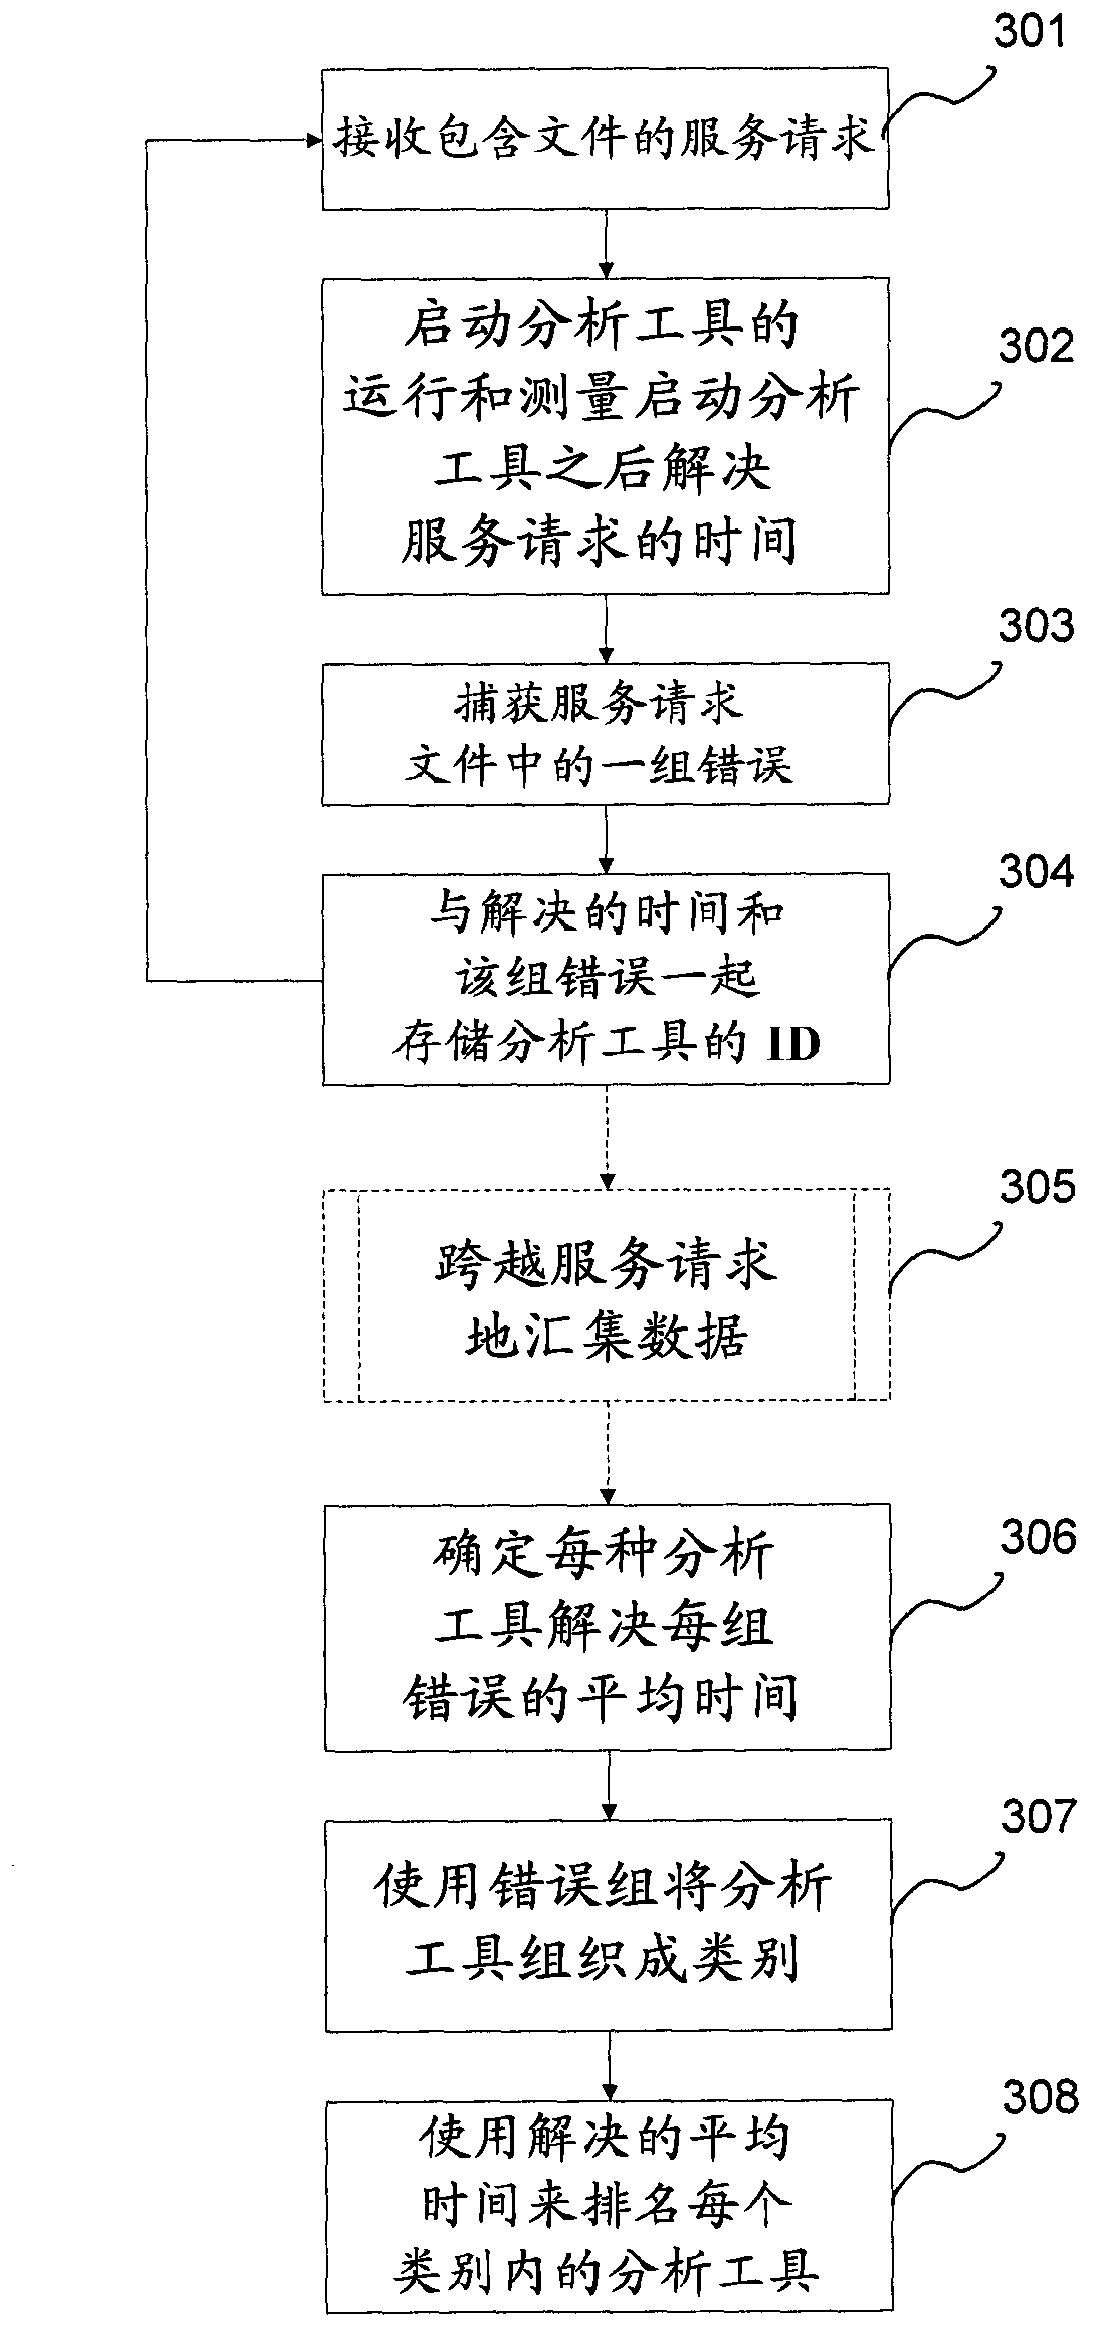 Method and system for ranking analysis tools